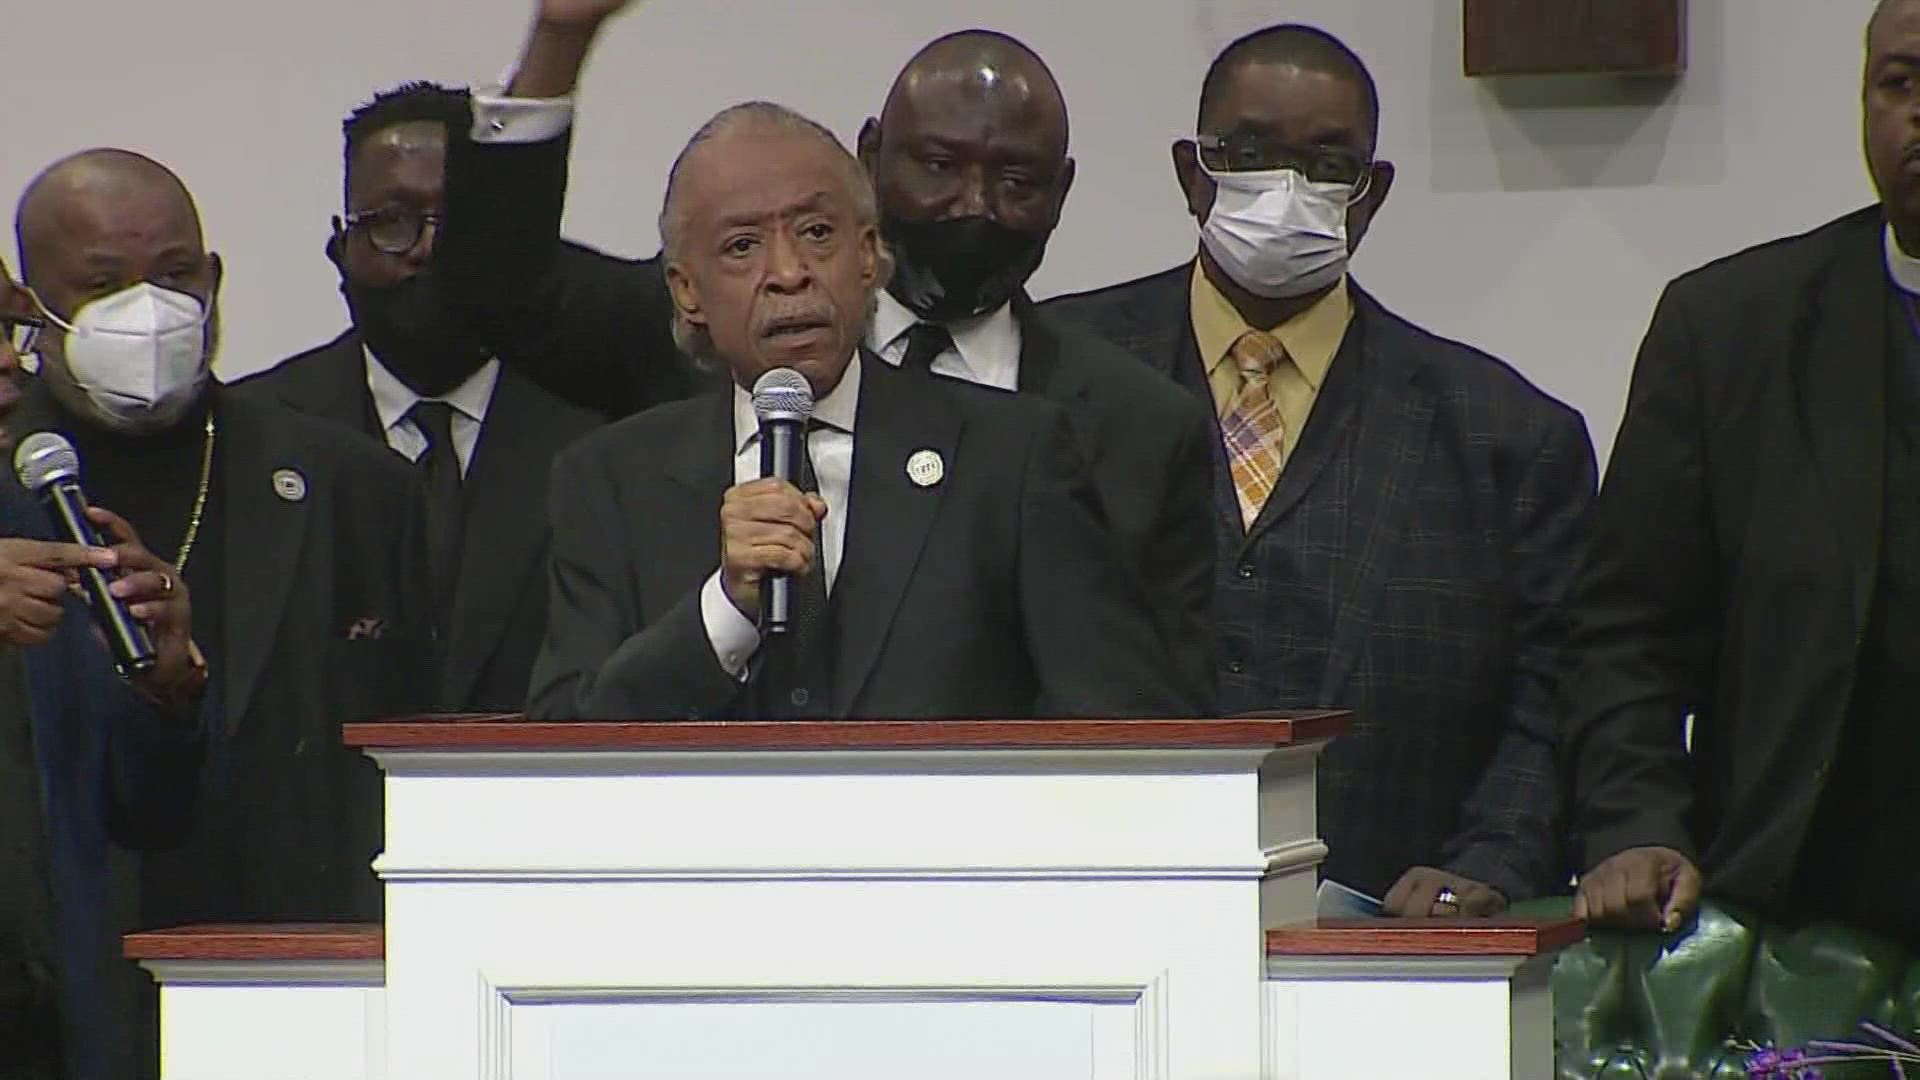 The Reverend Al Sharpton delivers the eulogy at the funeral of Patrick Lyoya on April 22, 2022.